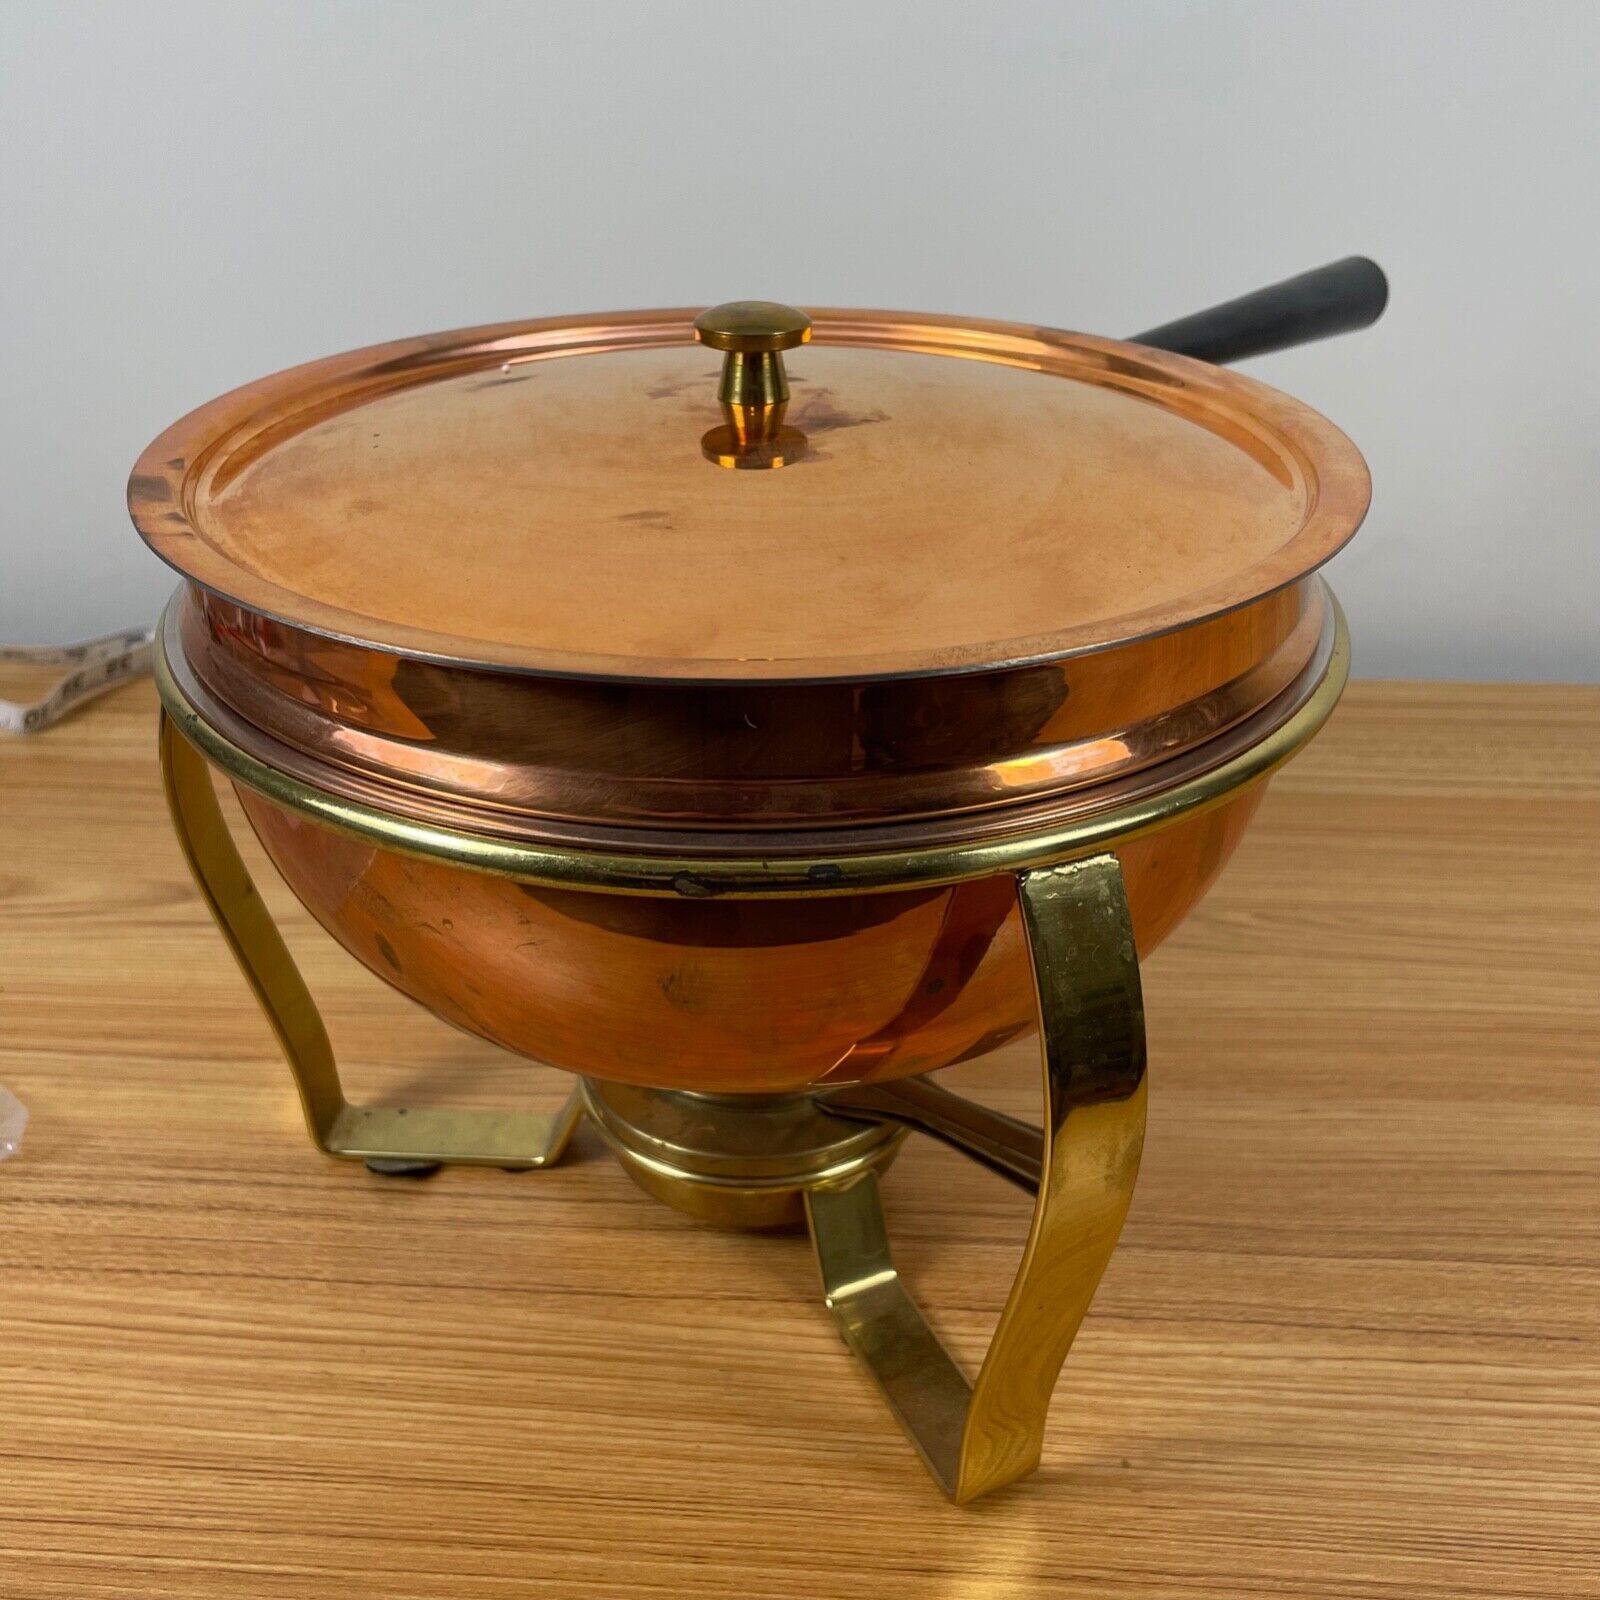 Vintage Swiss Spring Culinox Copper, Brass, Stainless Steel Pan / Warming Stand